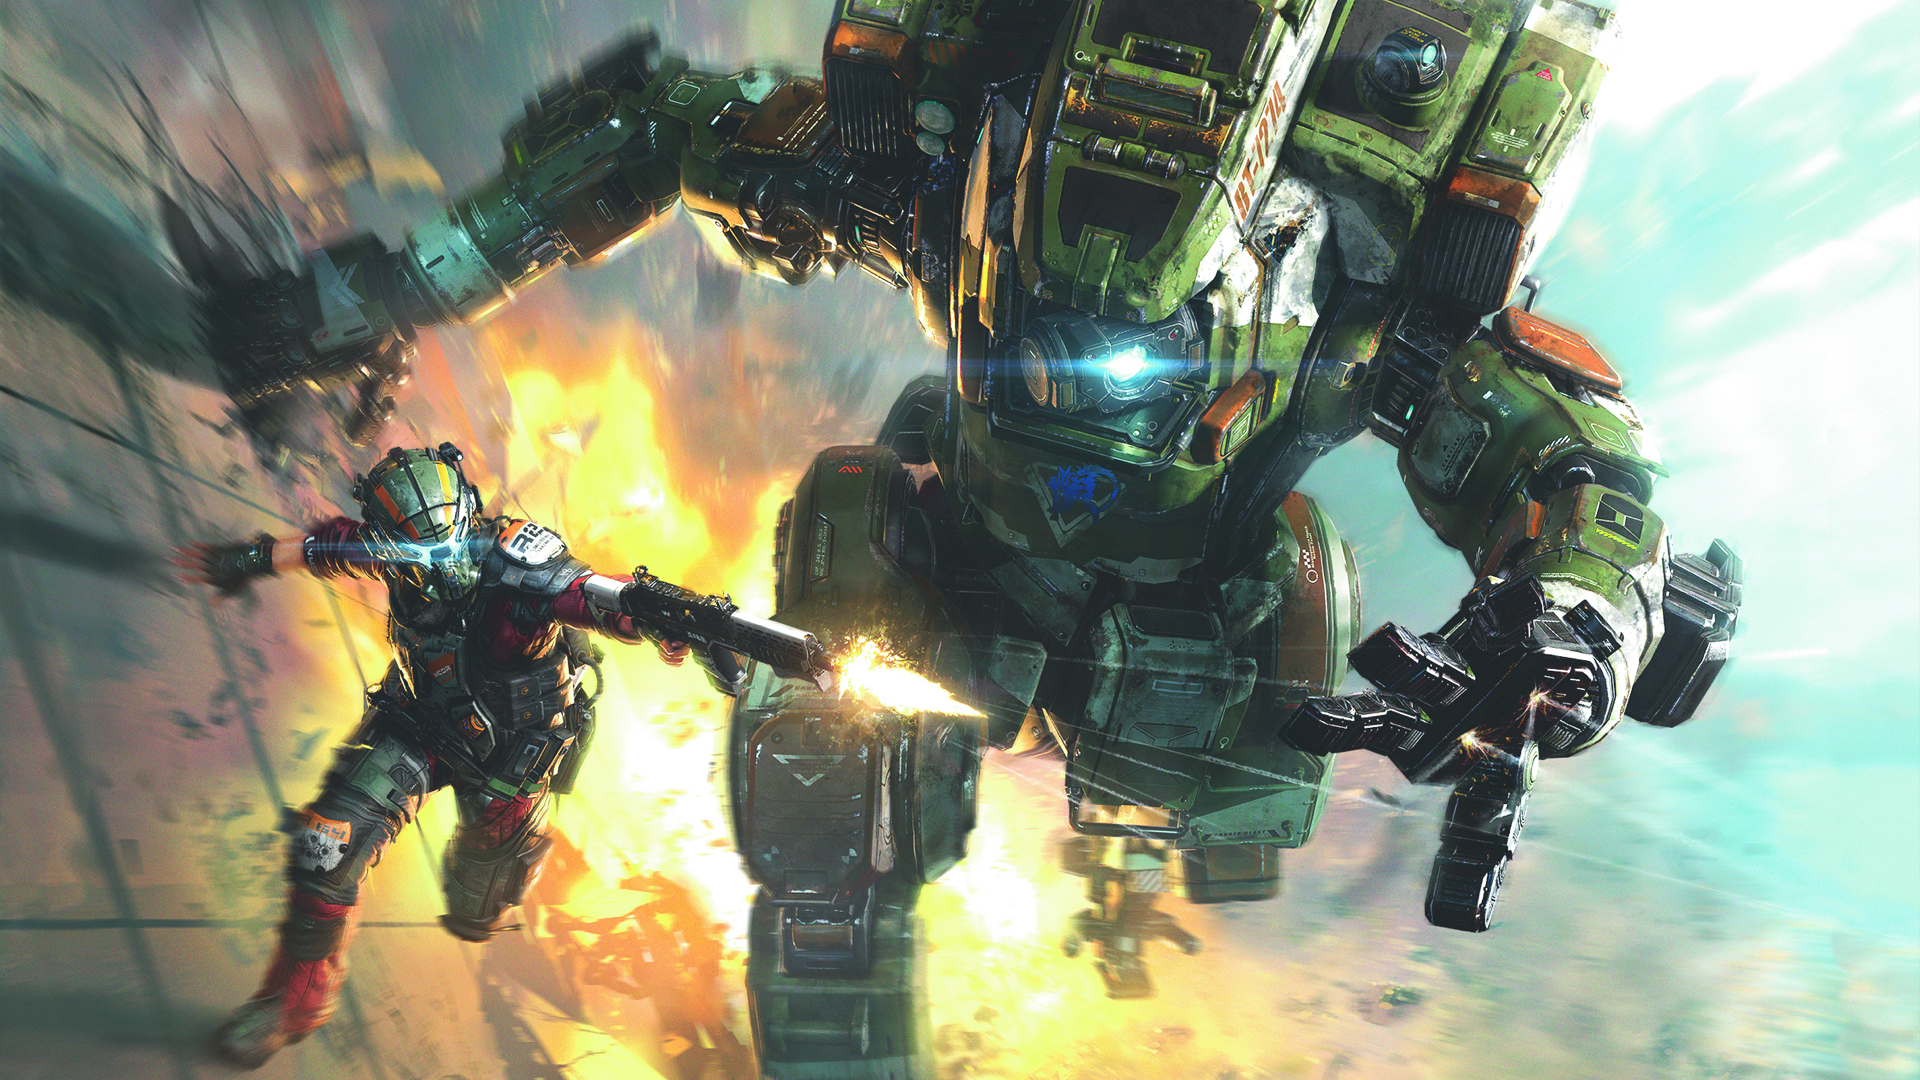 Titanfall 2 review: "The campaign's